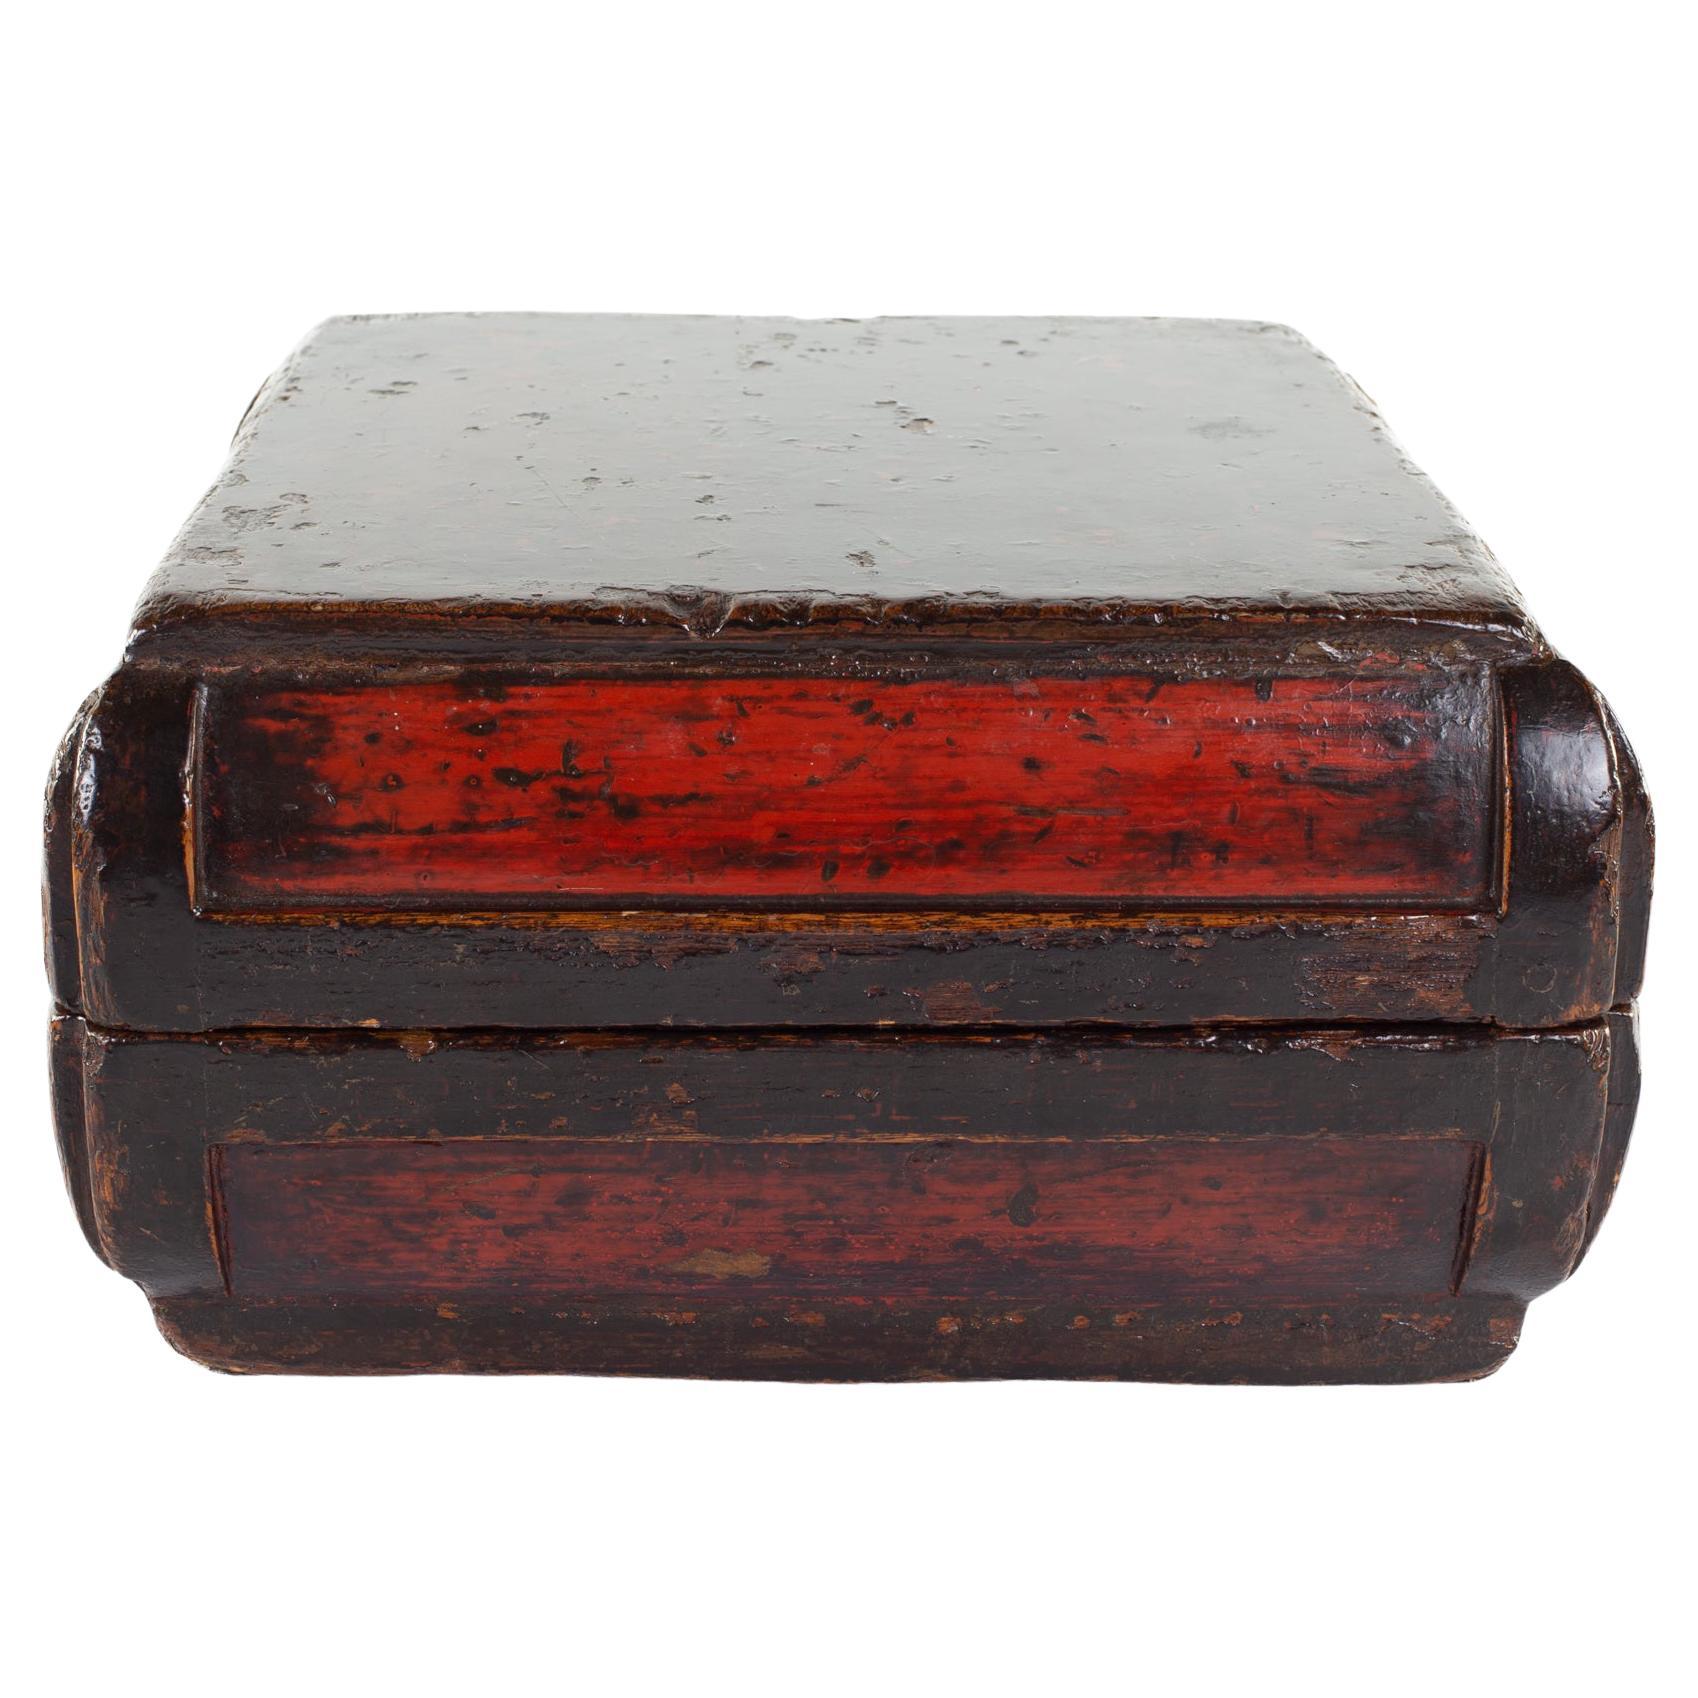 Antiqued Red Lacquer Trinket Box